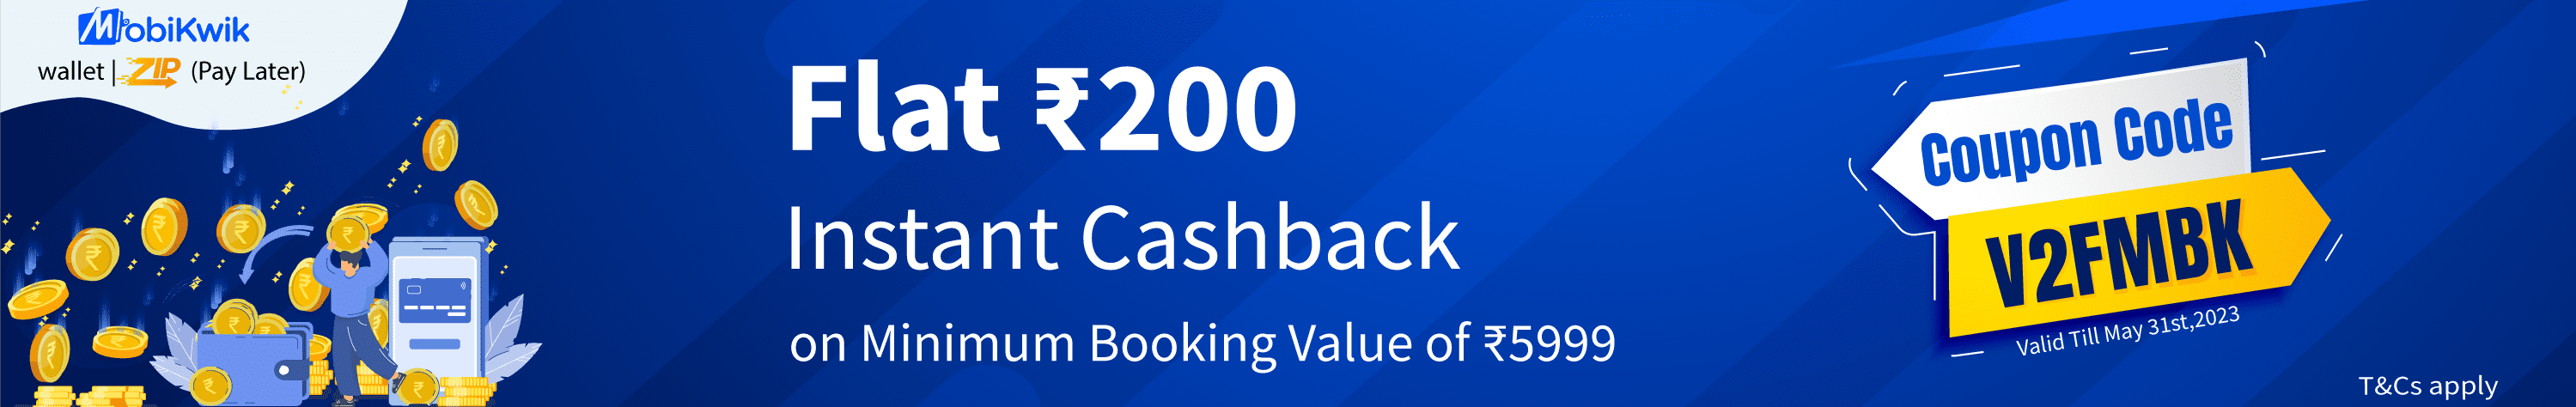 Big Pockets, Bigger Rewards! Use your Mobikwik Wallet to celebrate ₹200 Instant Savings. Tap the Banner for exclusive deals. Happy Journey!